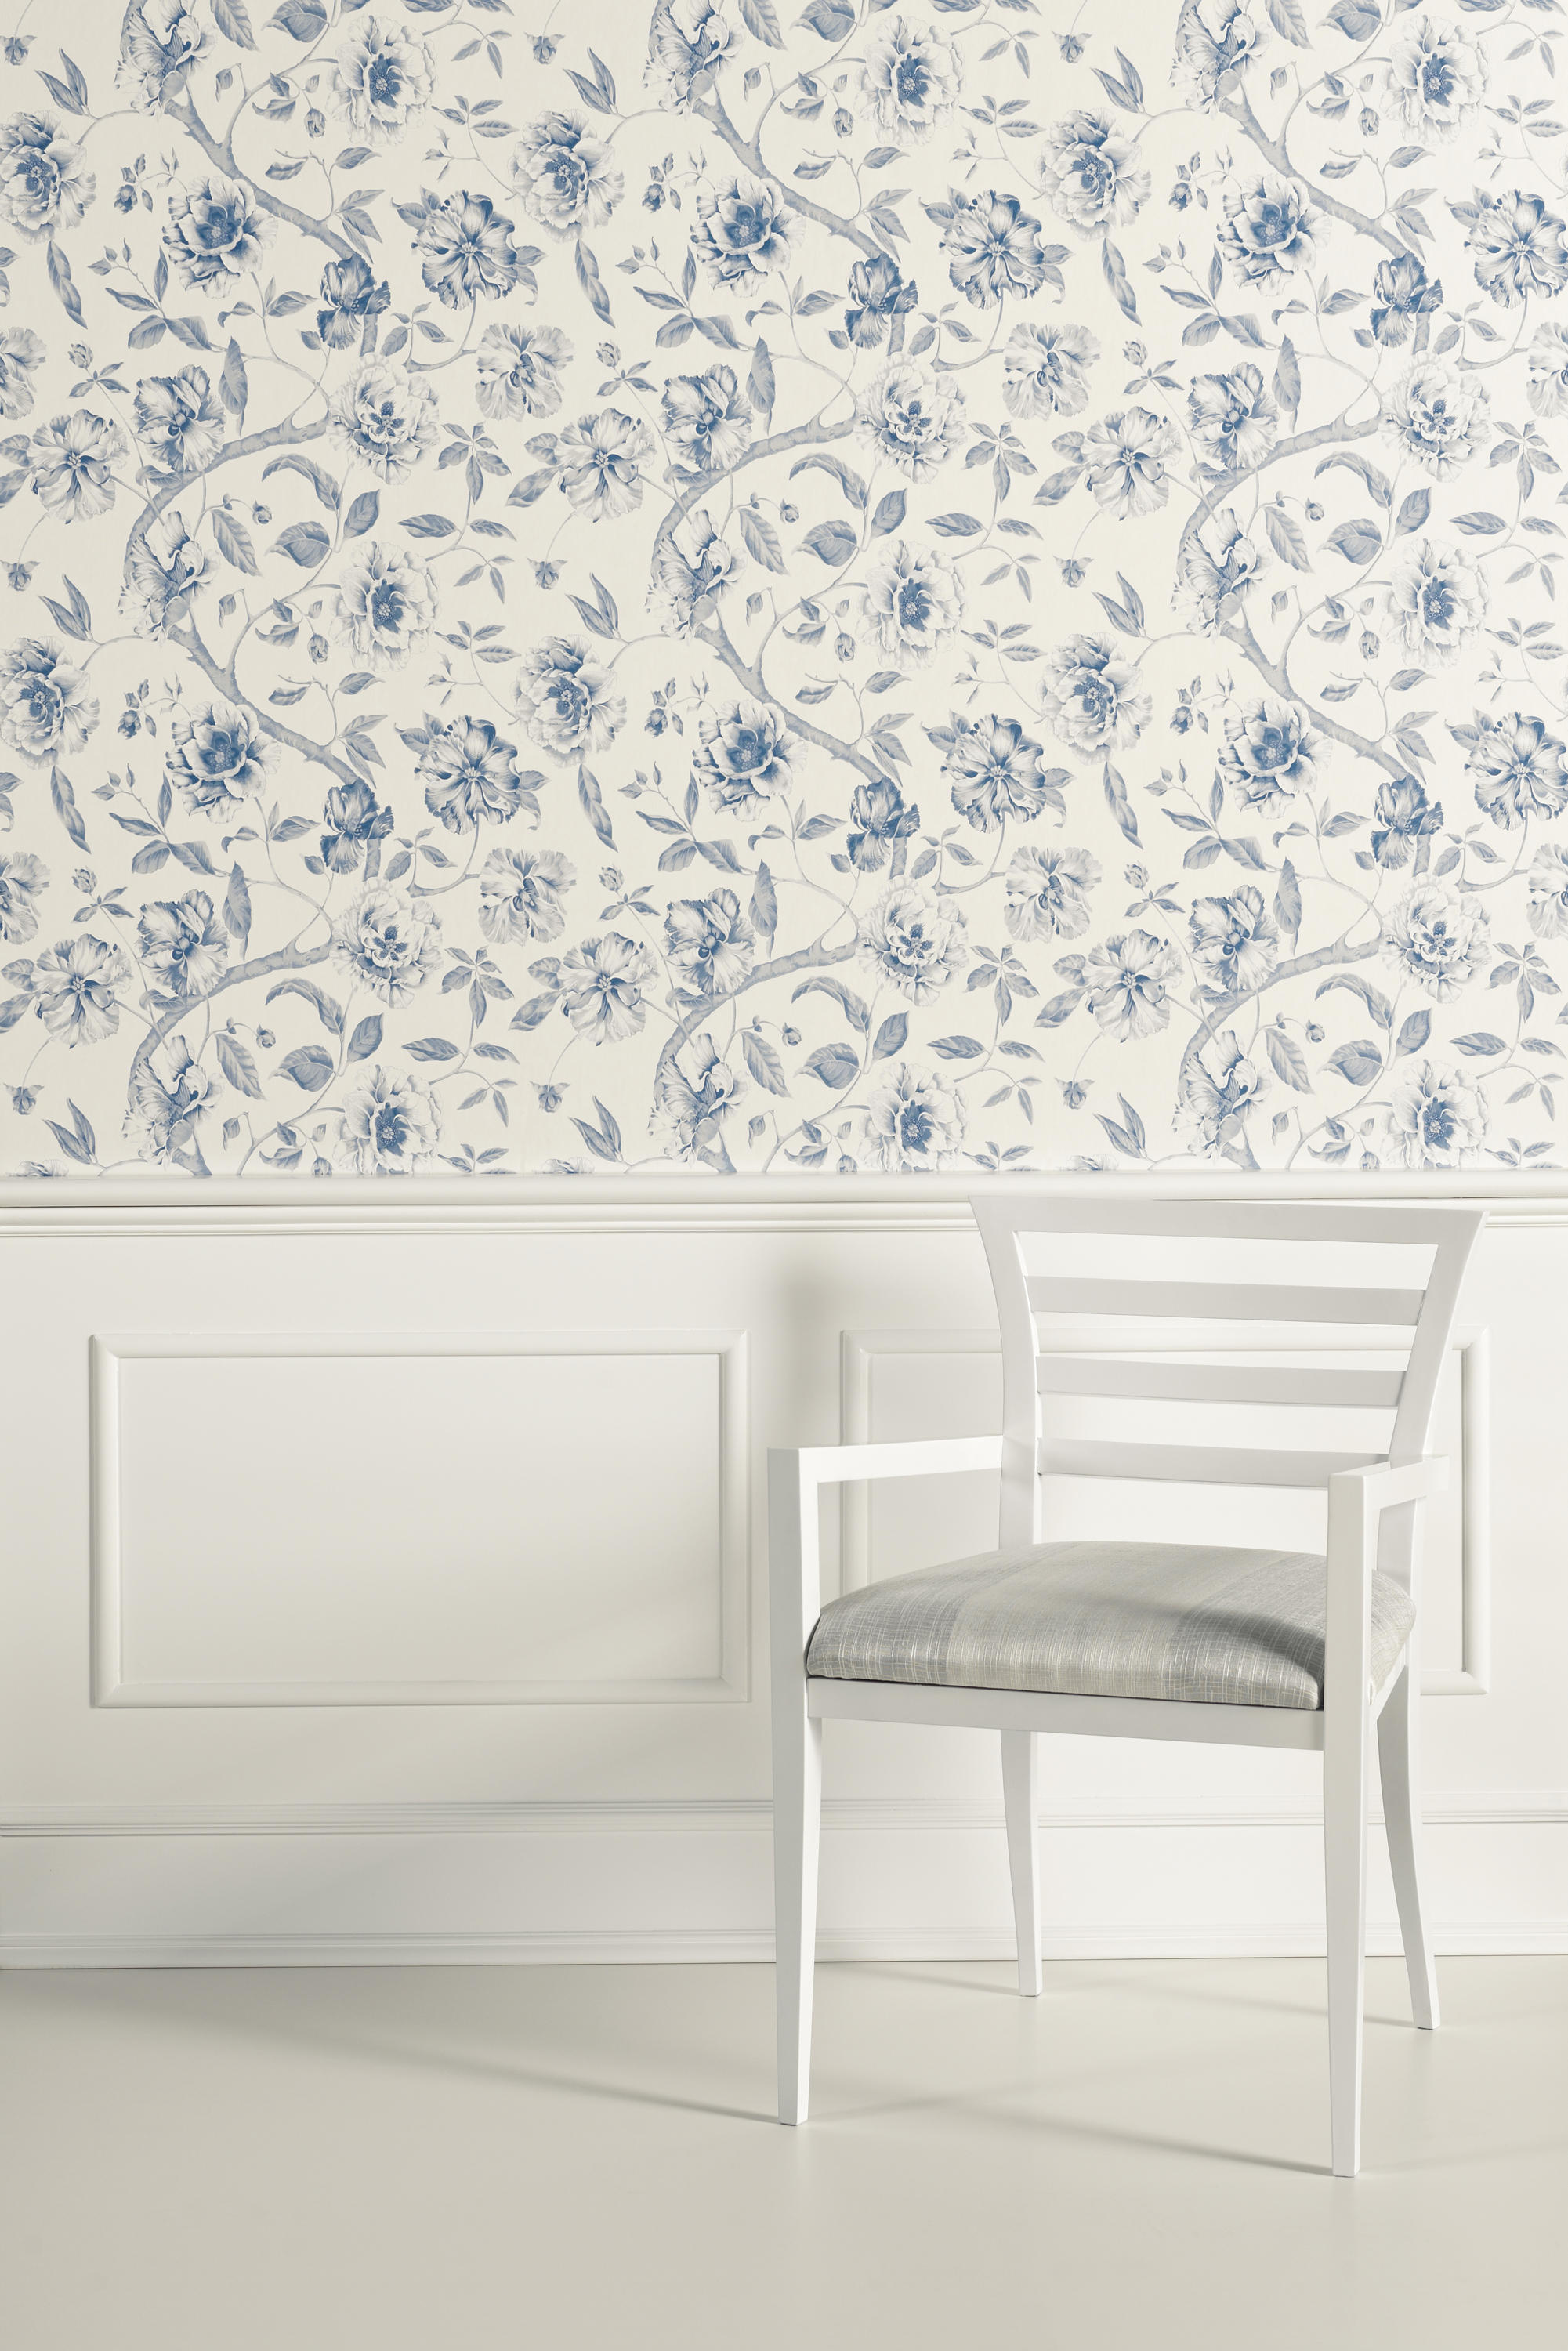 Adagio Azul Wall Coverings Wallpaper From Equipo Drt Architonic